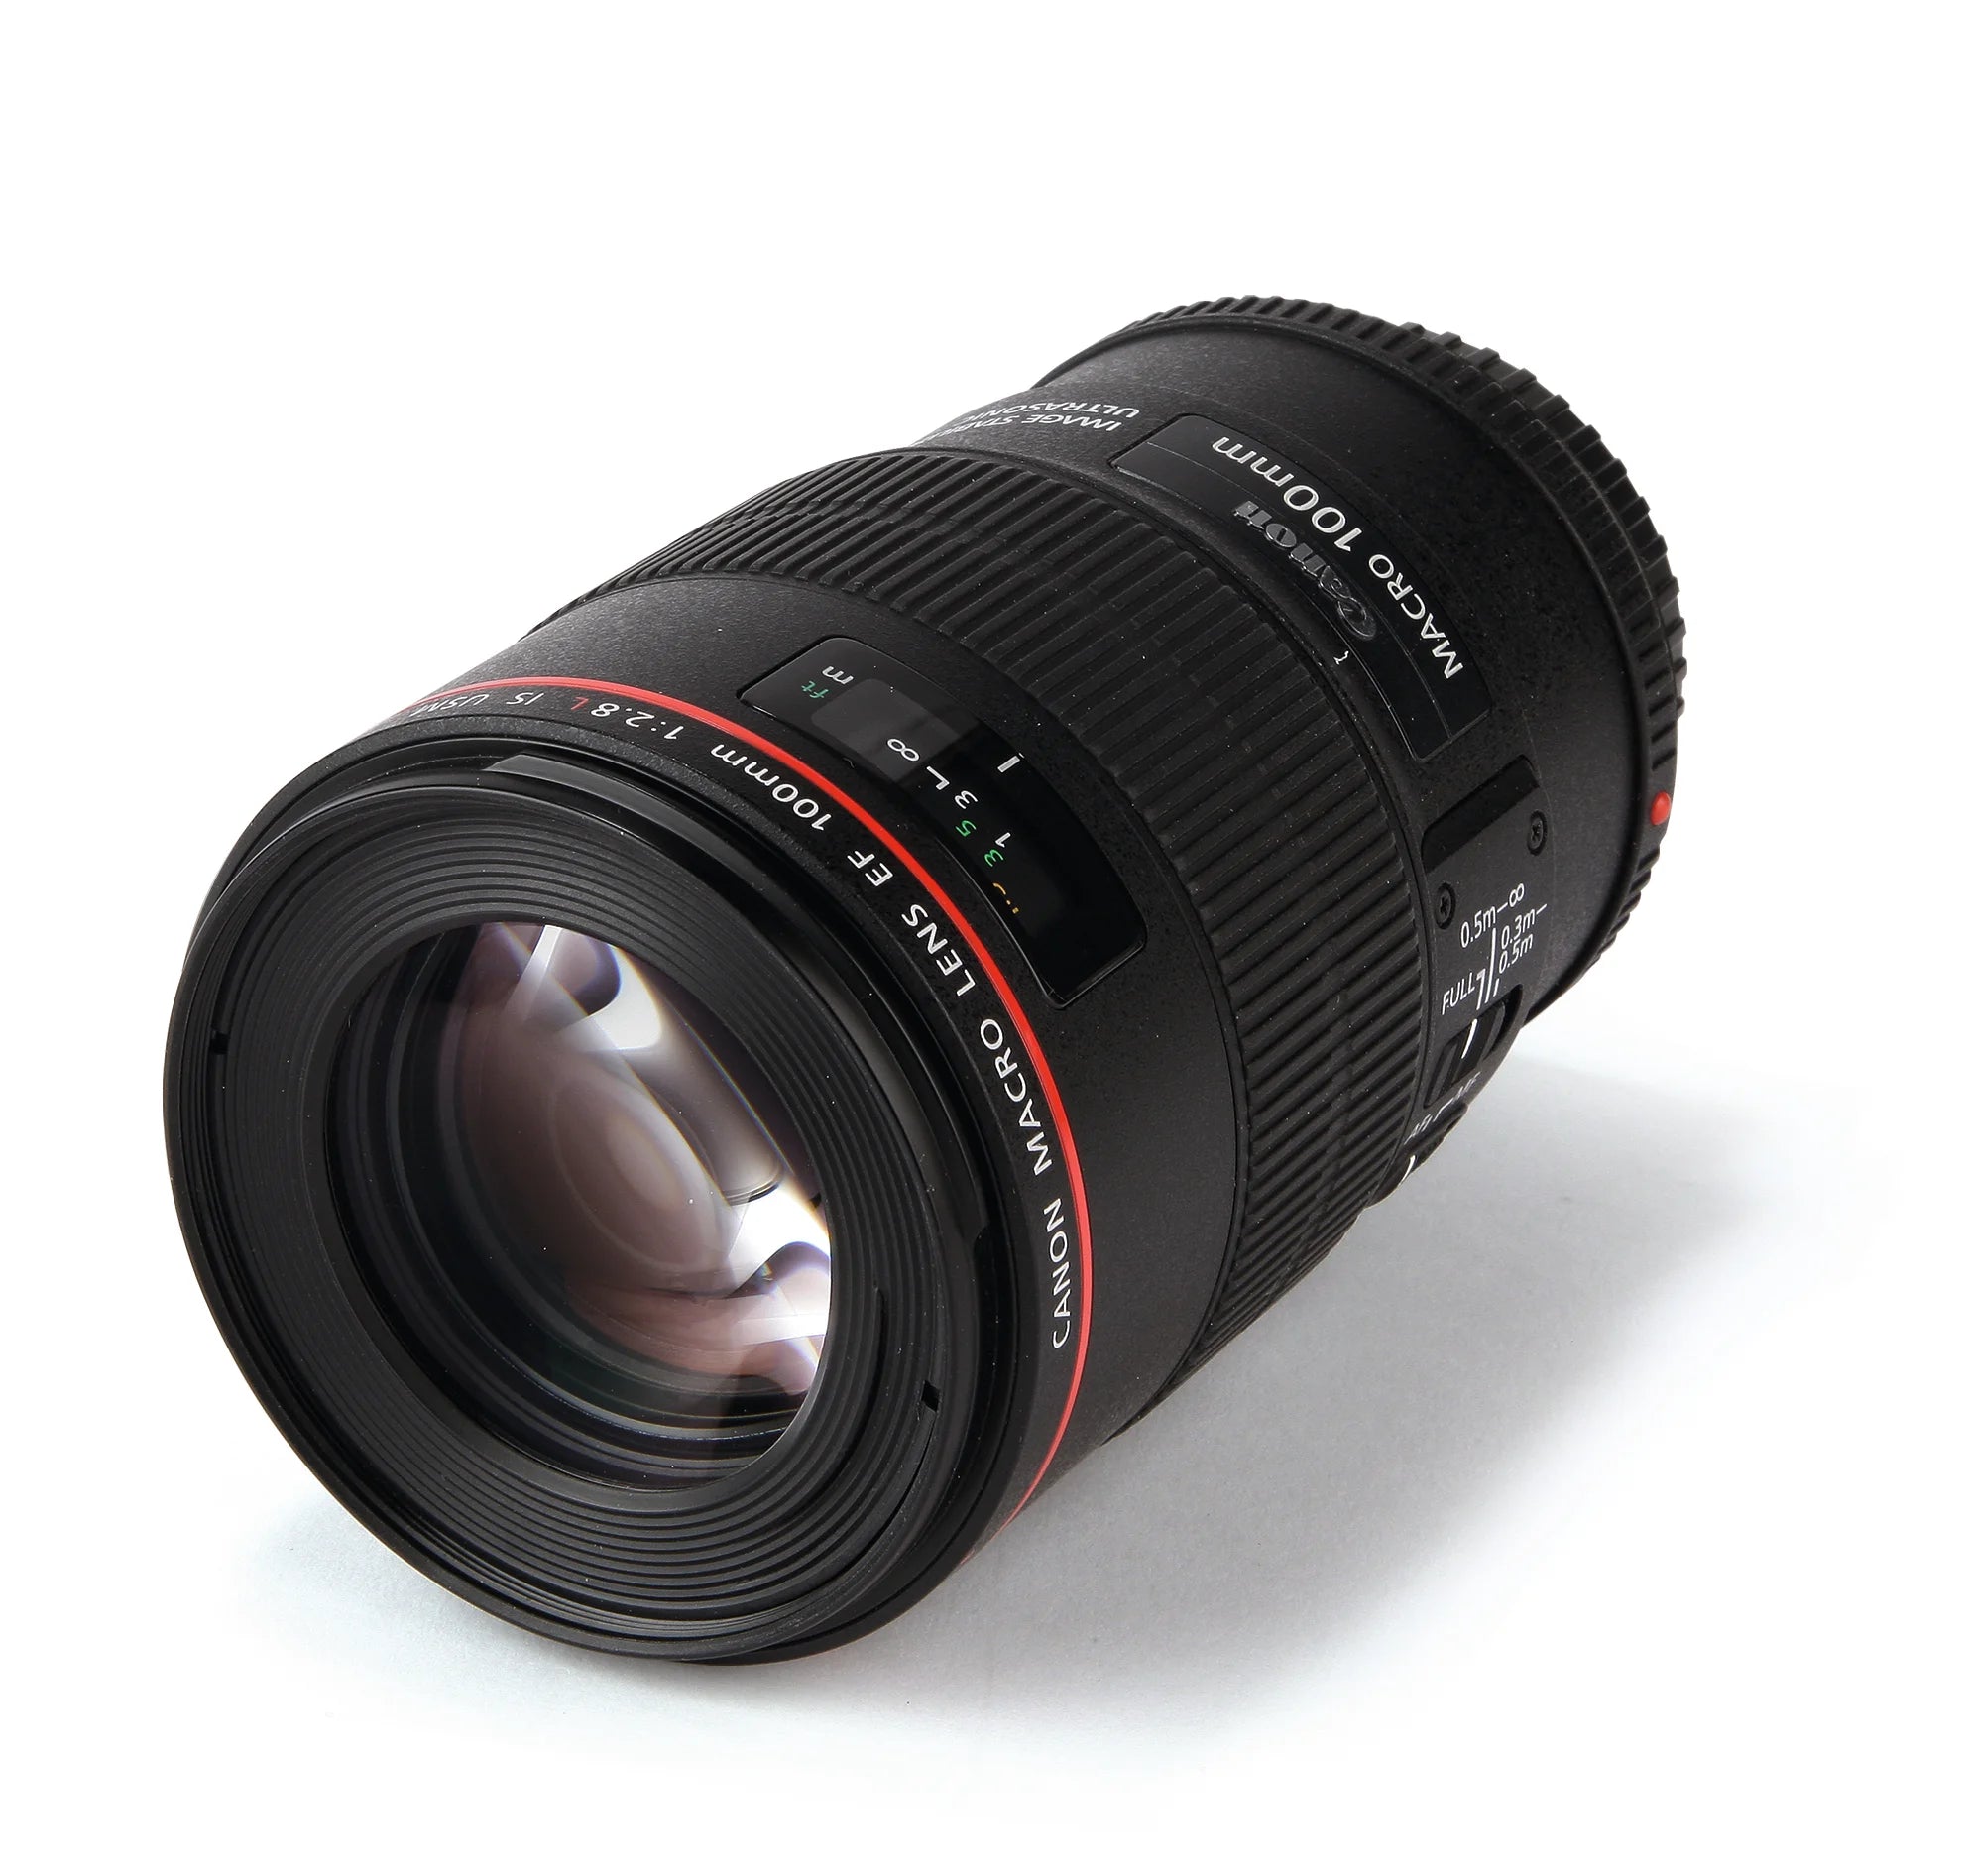 Canon EF 100mm f2.8 L Macro IS USM Lens - Product Photo 2 - Side View